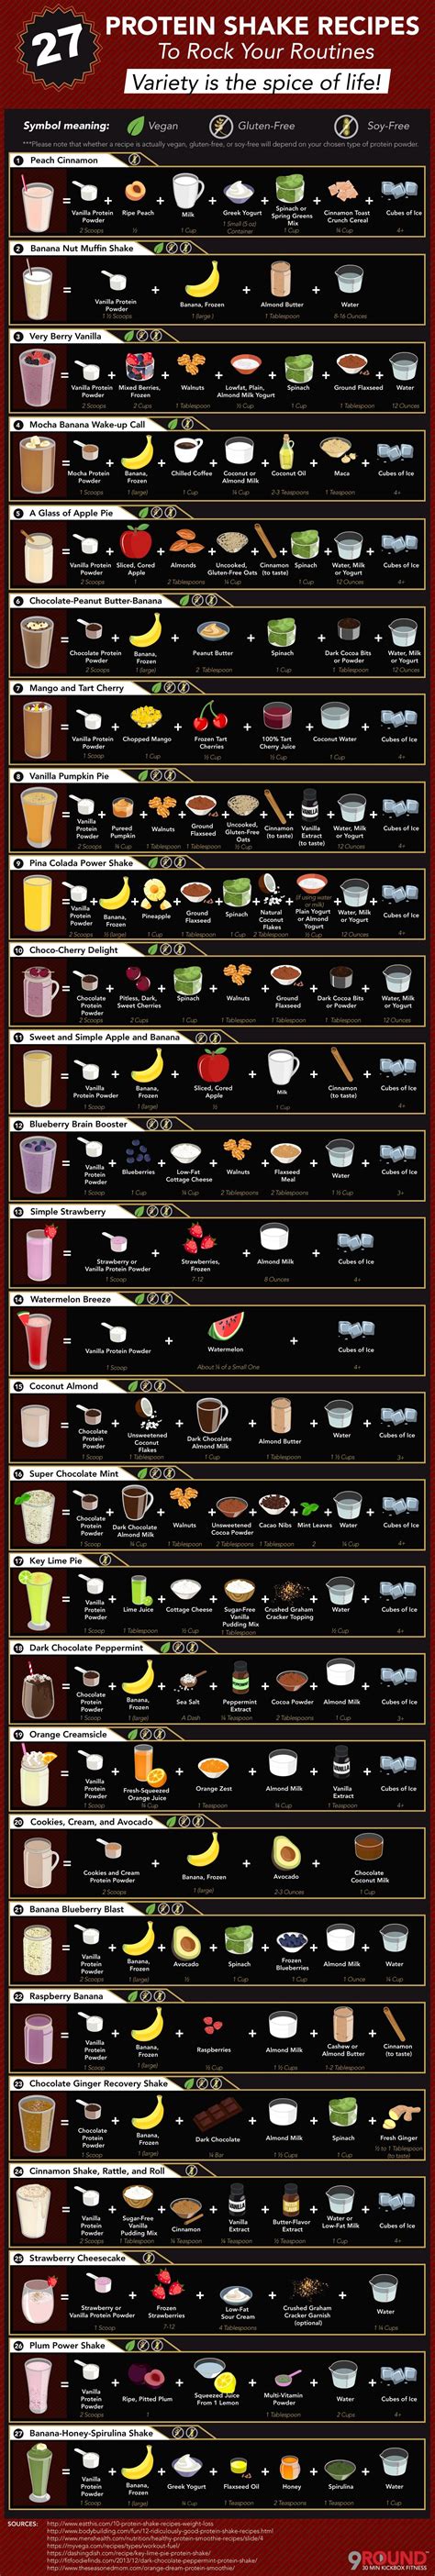 Smoothie Recipes! High Protein Smoothie Recipes, Smoothie Proteine, Protein Drinks, Healthy ...